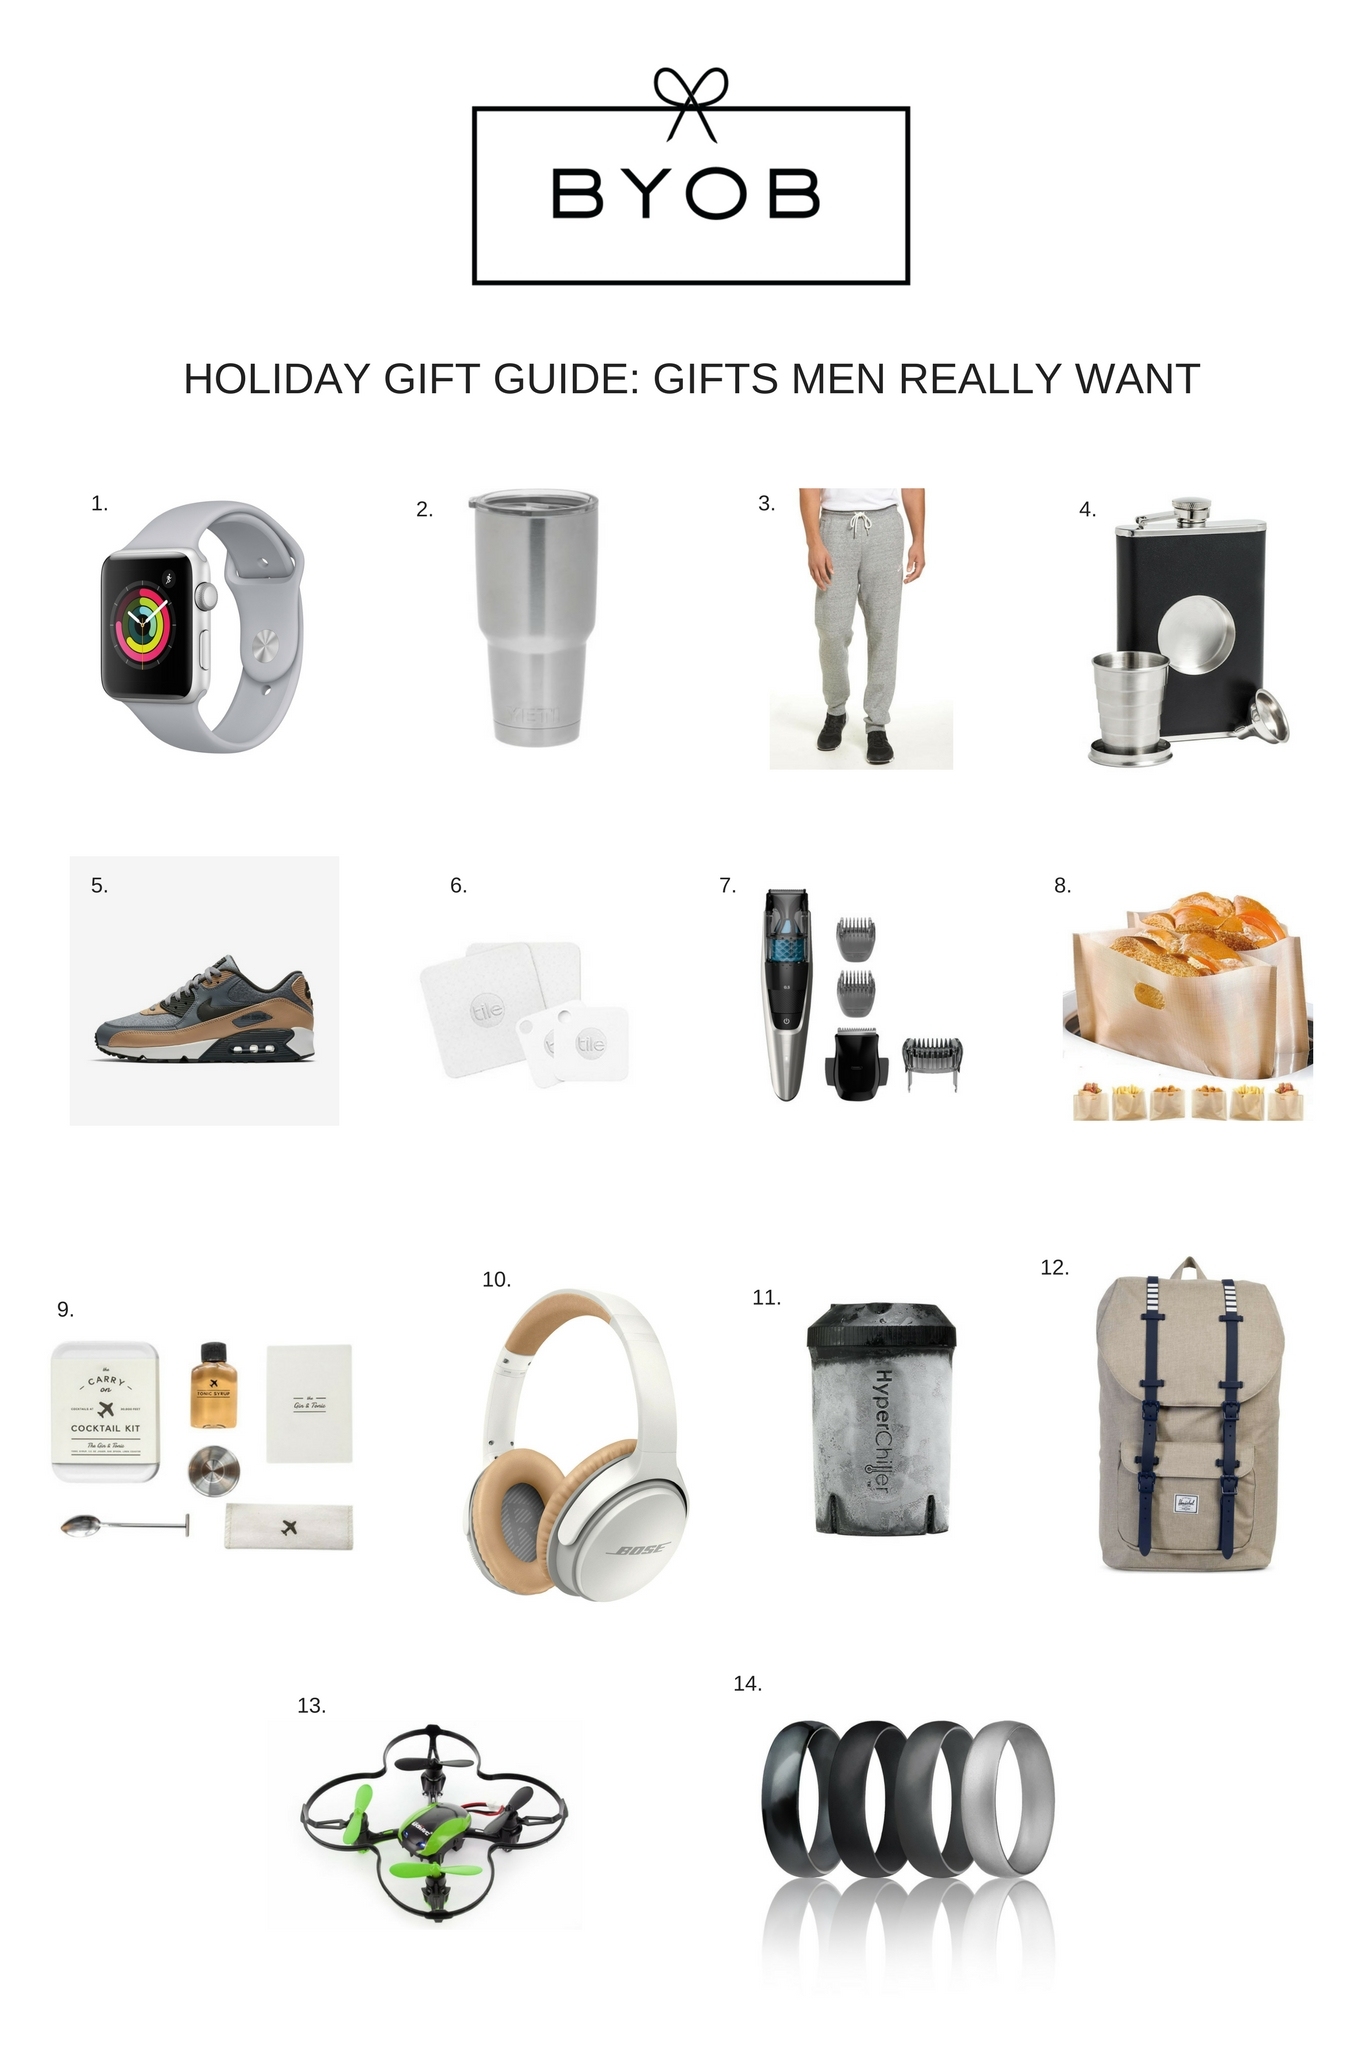 GIFT GUIDE NO.3 - GIFTS MEN REALLY WANT - Courtney Shields